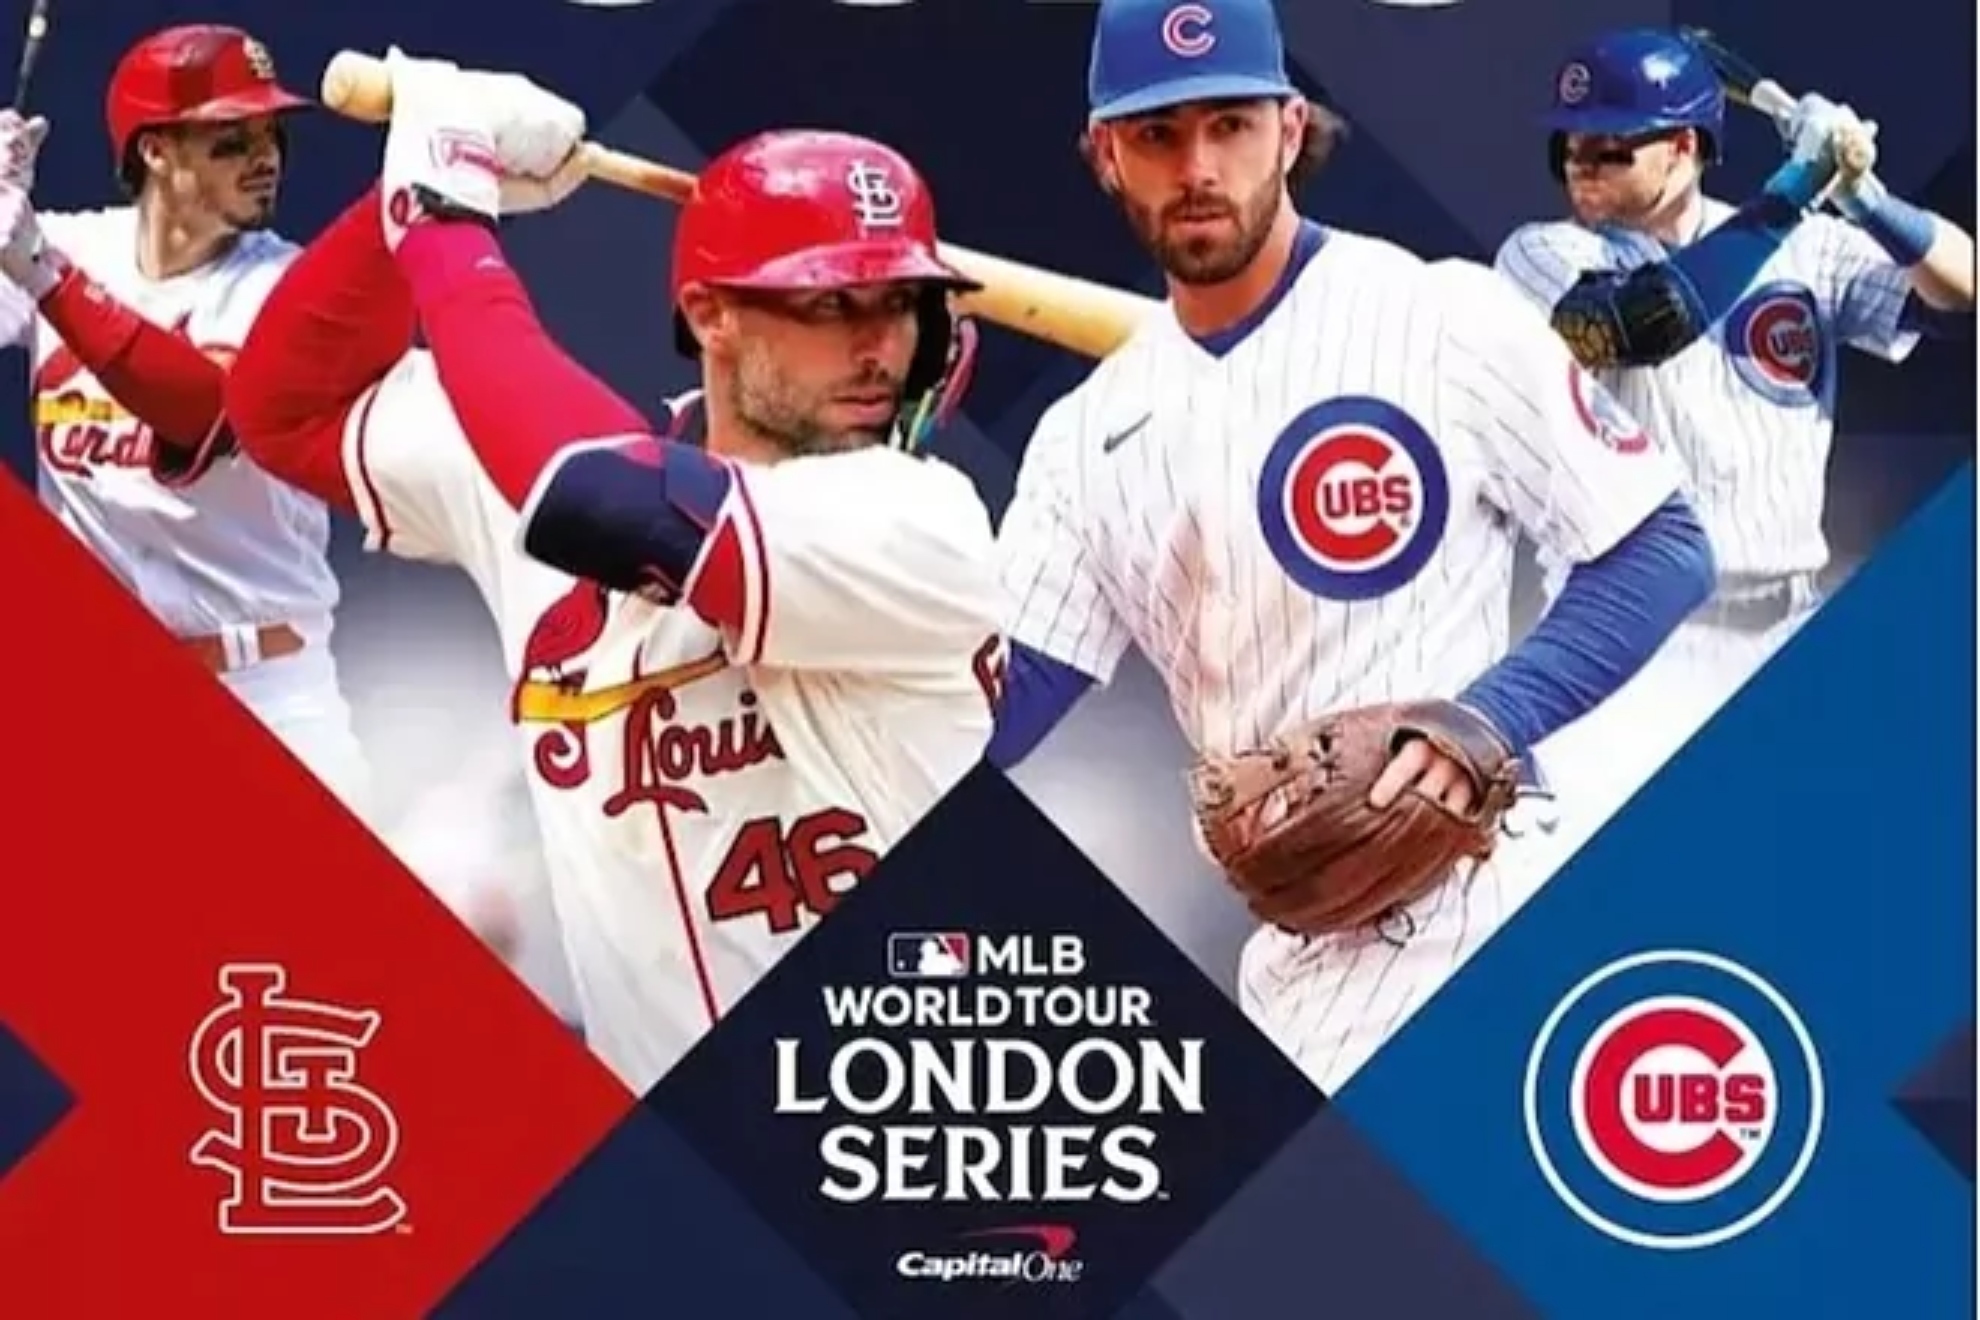 MLB in London: Steele, Happ shine in Cubs 9-1 win over Cardinals on their first game in Europe